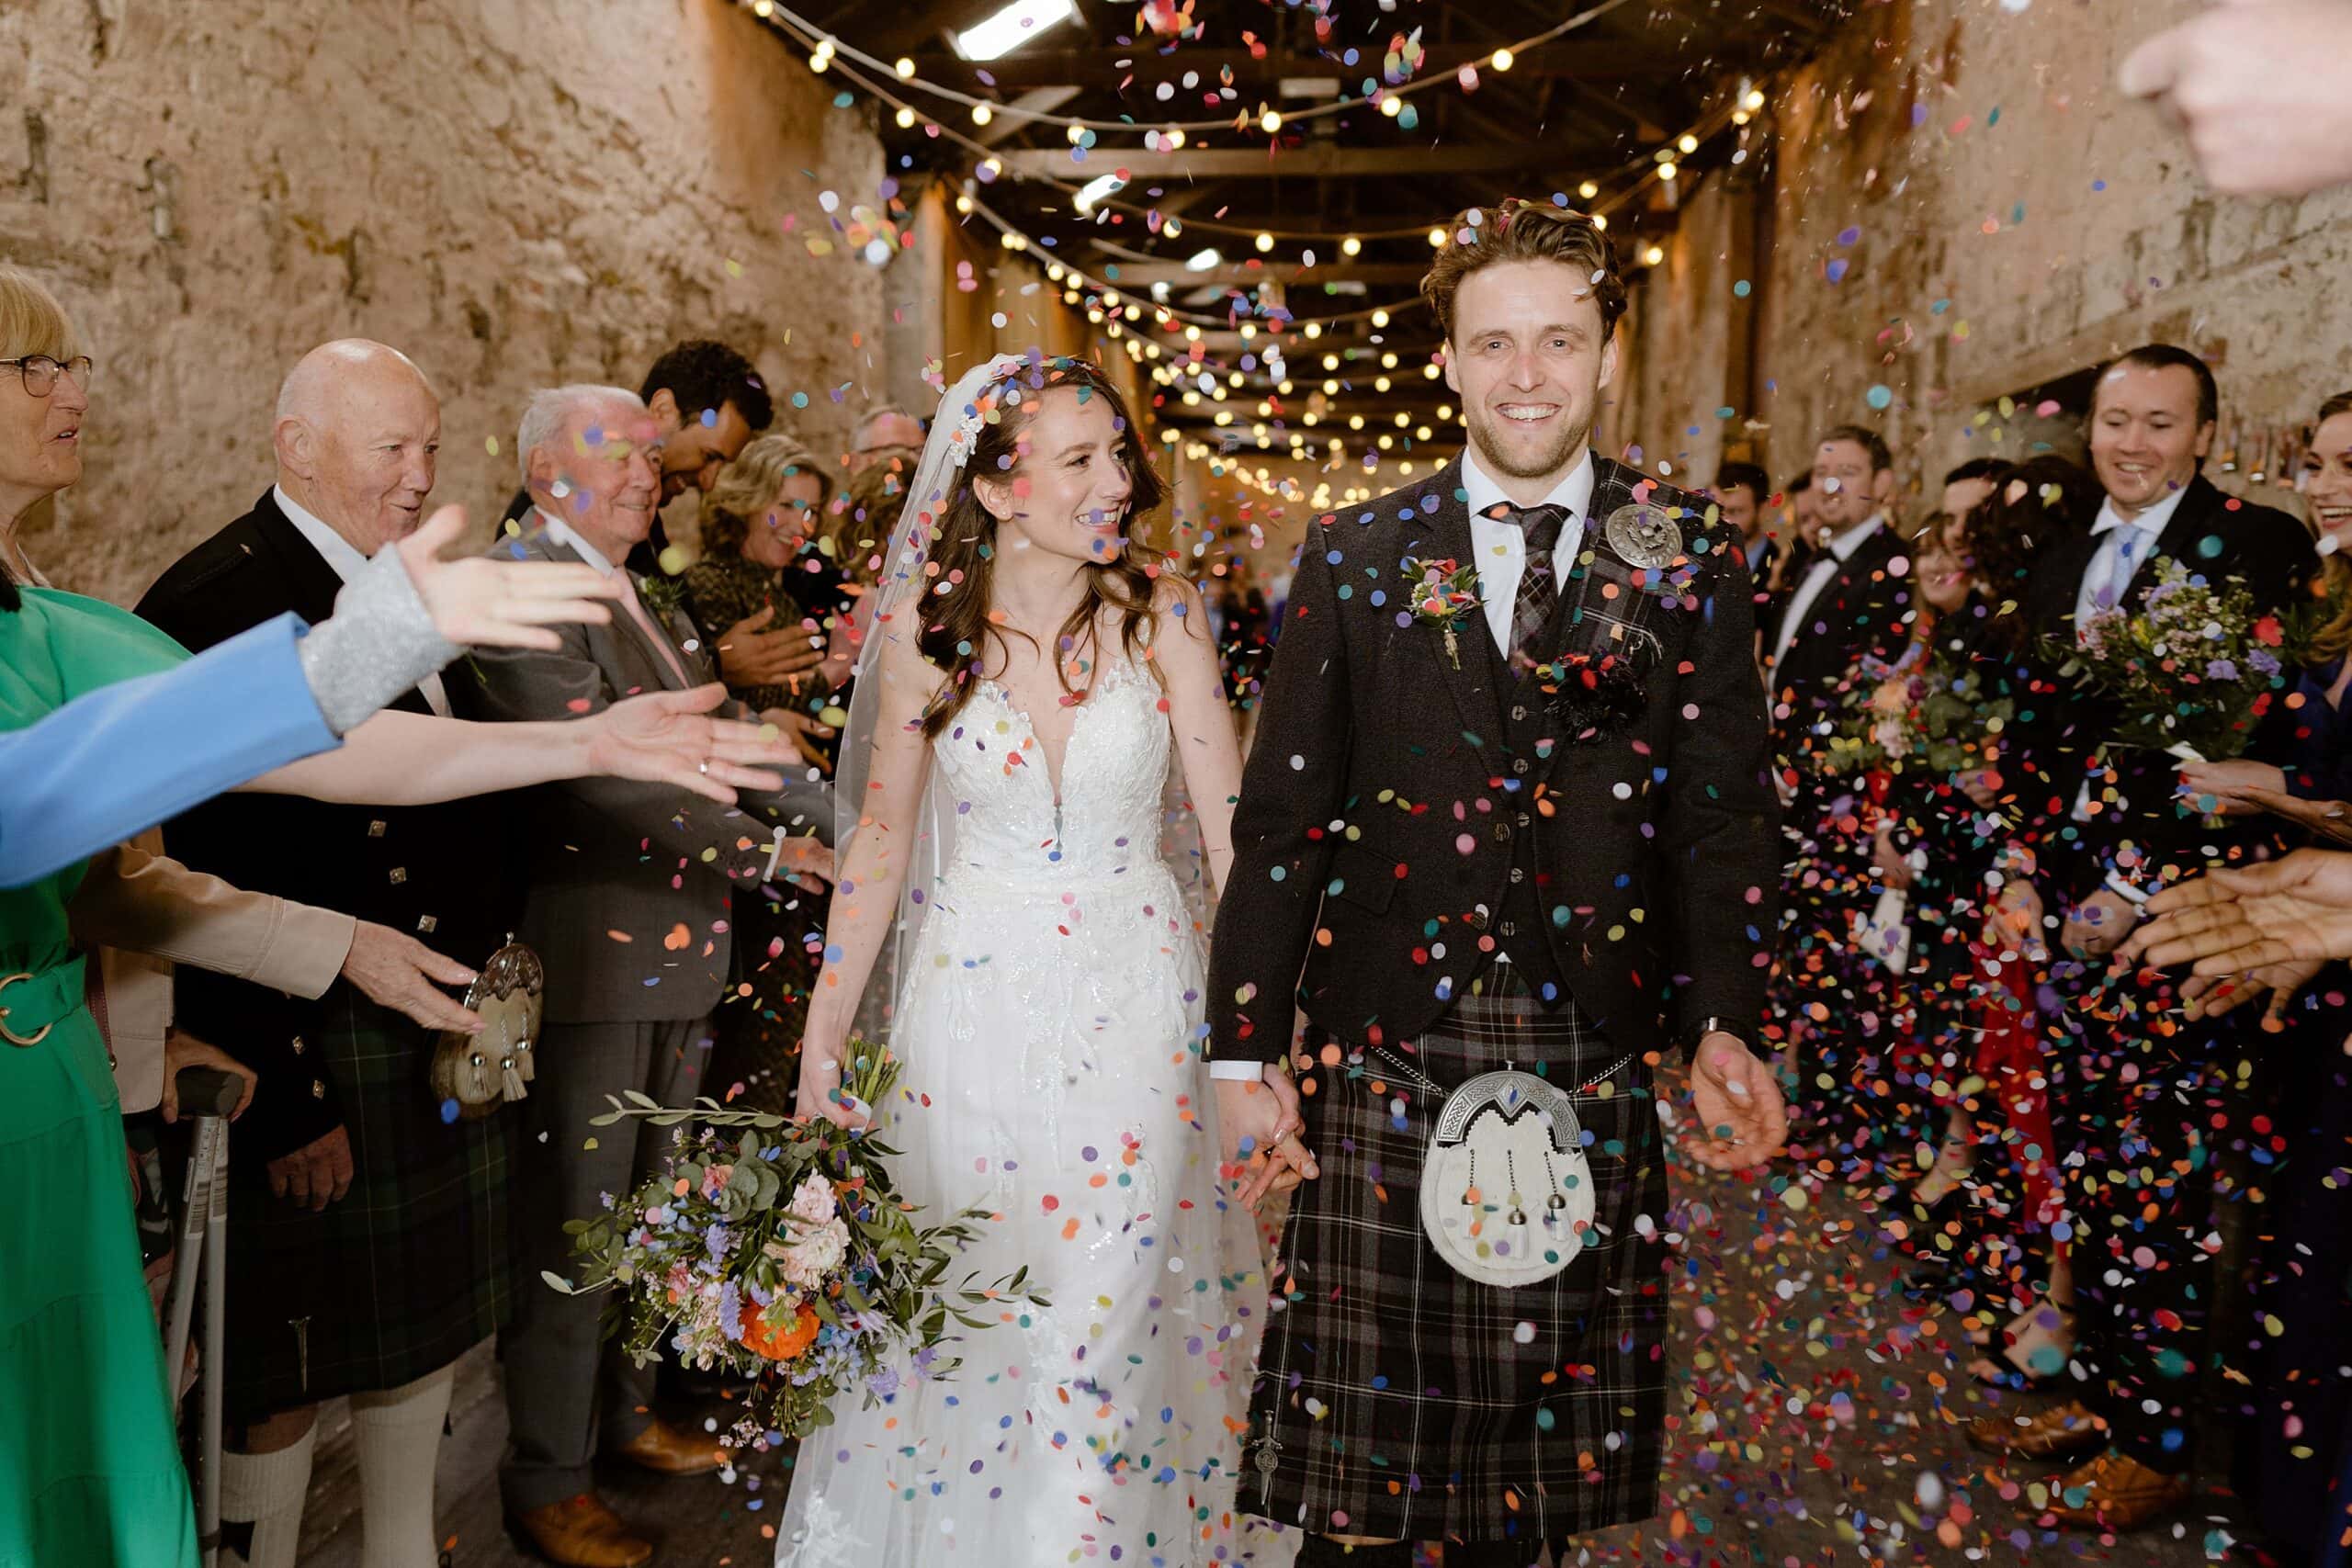 the bride and groom hold hands and smile as guests toss confetti beneath festoon lights following their wedding ceremony captured by st andrews wedding photographer